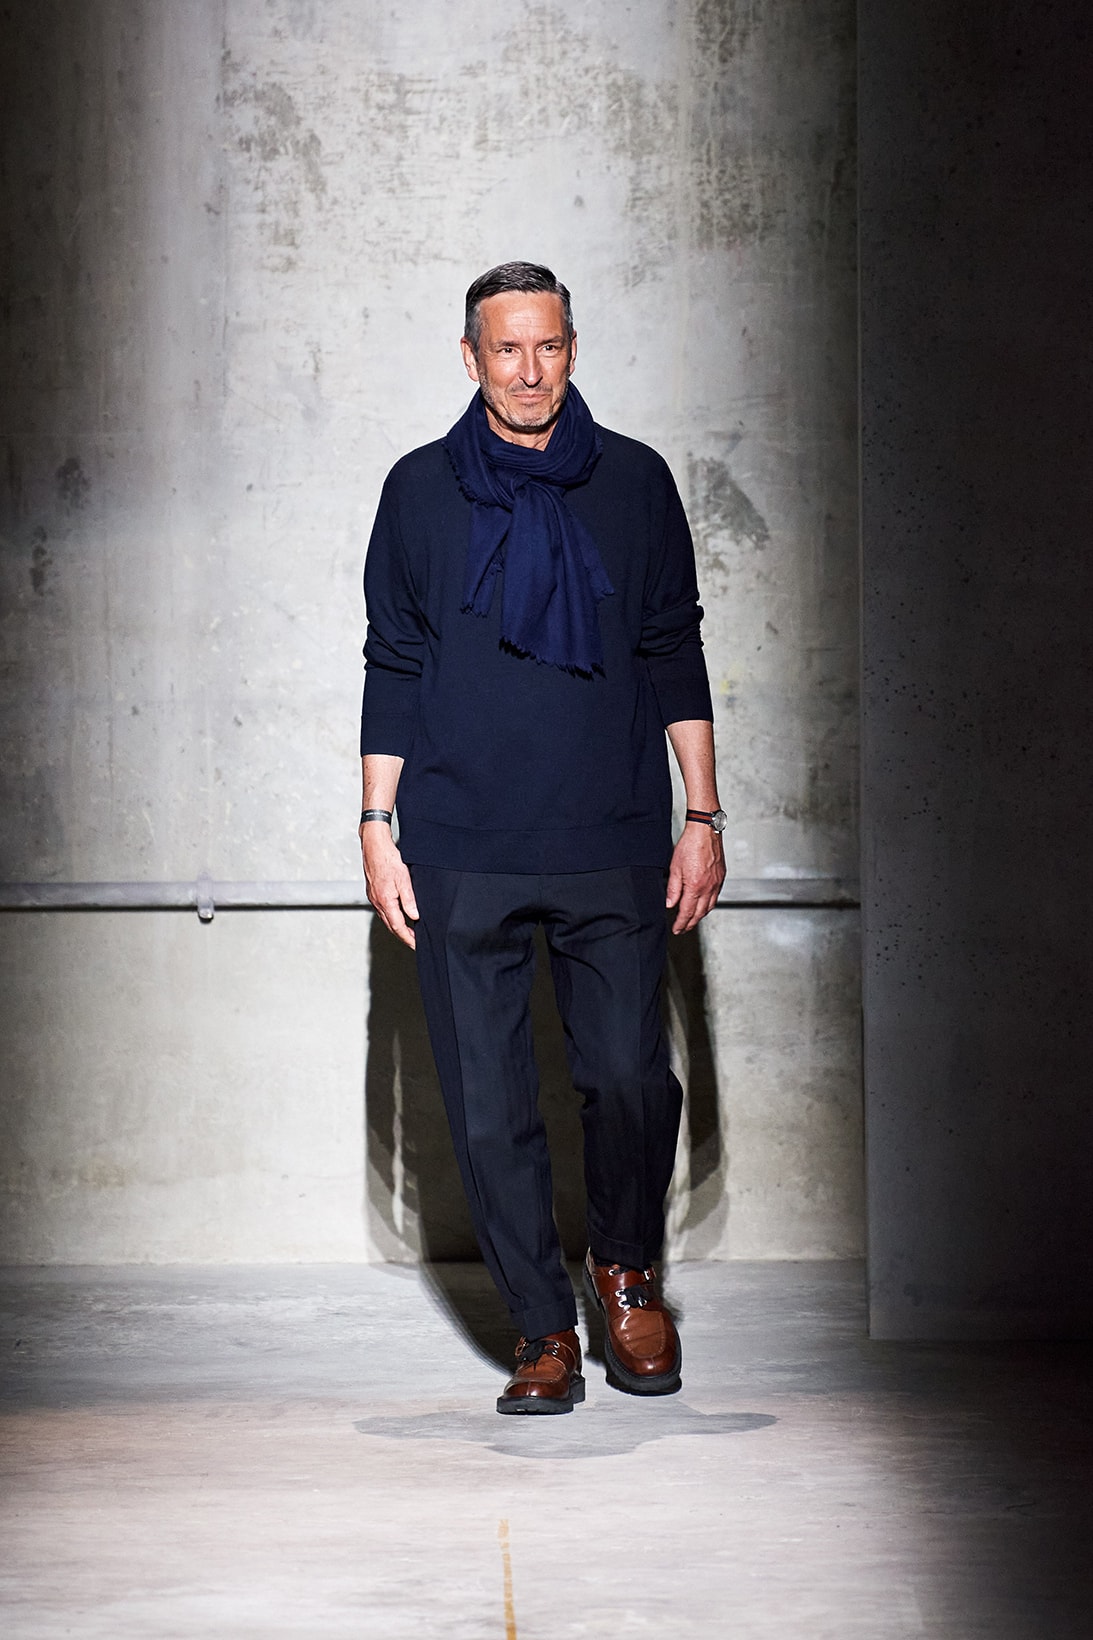 dries van noten proposes fashion deliveries discounting calendar reset adjustment sustainability